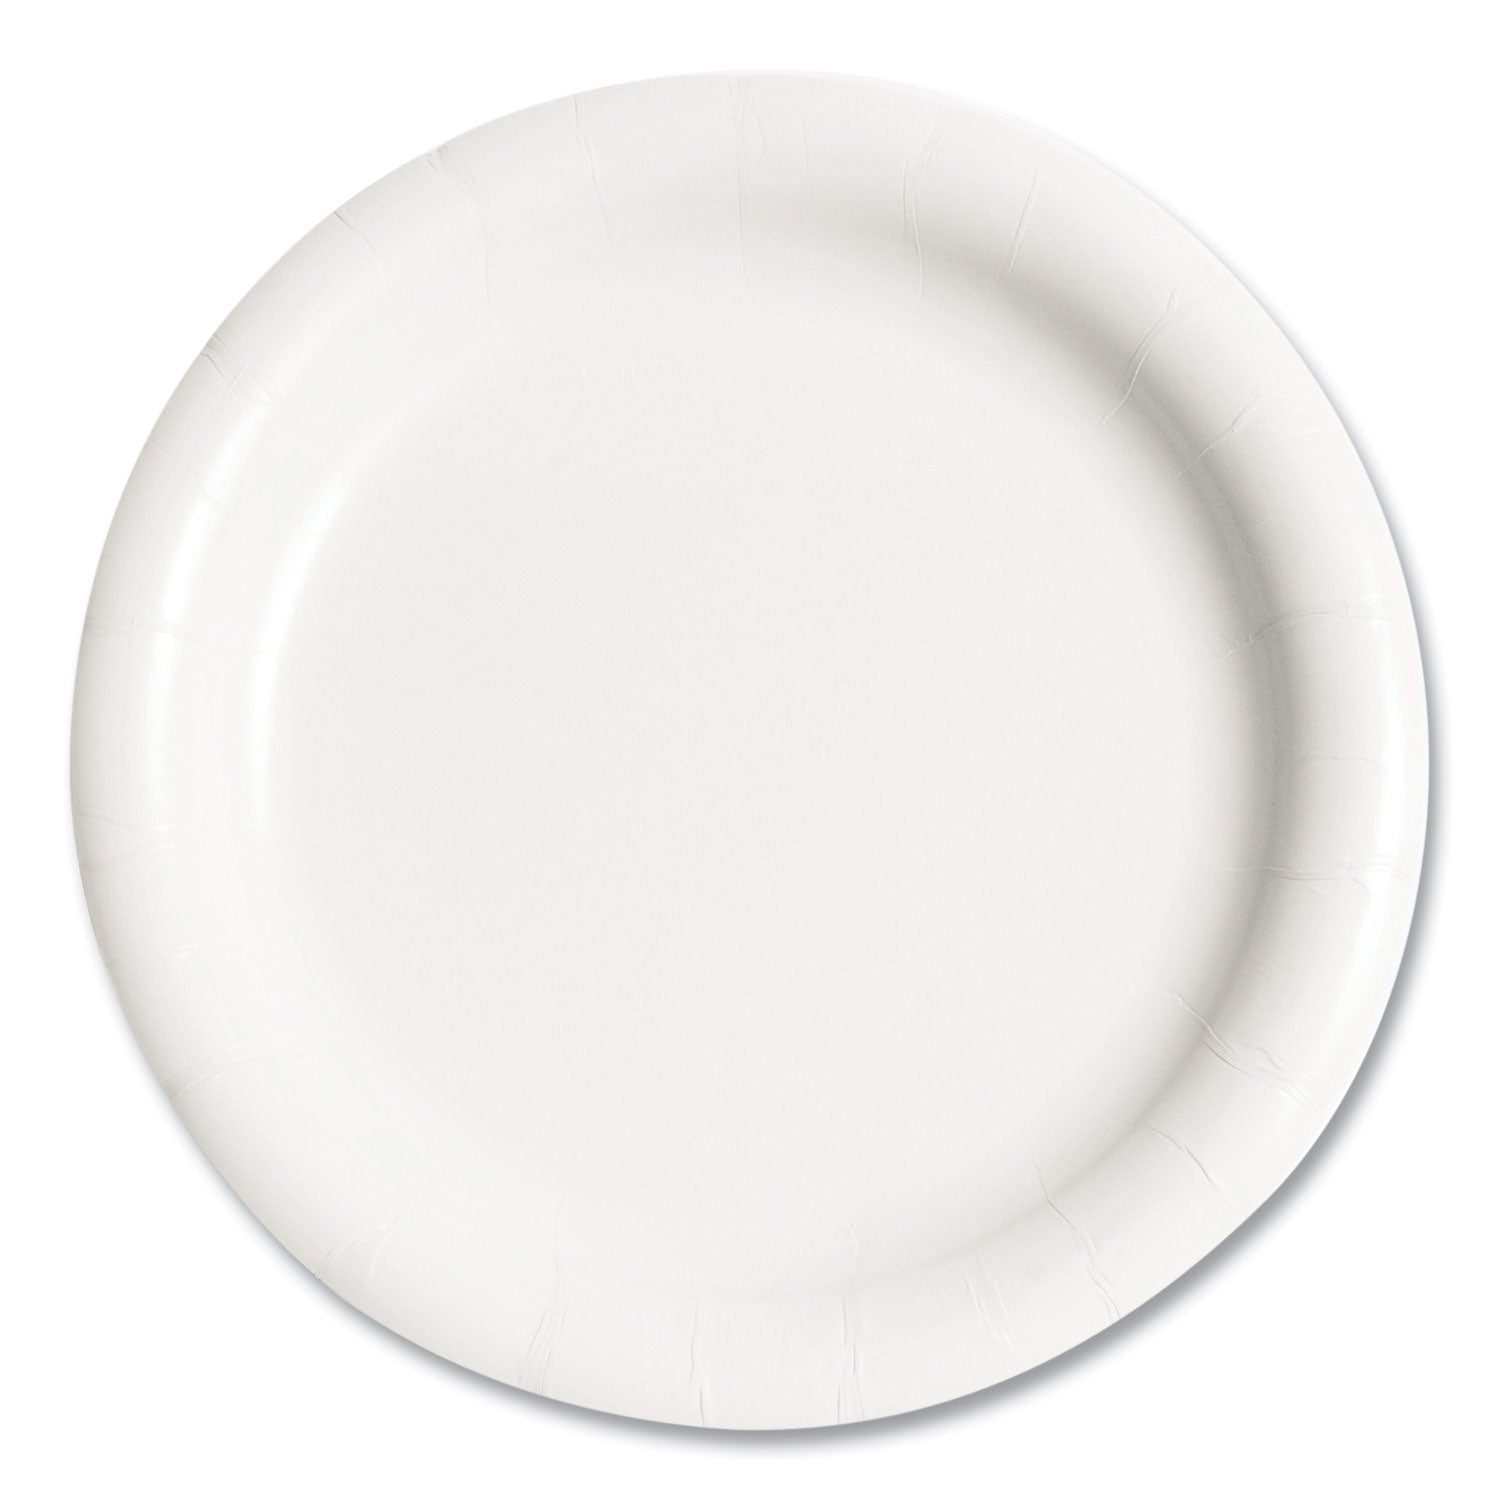 bare-eco-forward-clay-coated-mediumweight-paper-plate-proplanet-seal-9-dia-white-125-pack-4-packs-carton_sccmwp9b - 1